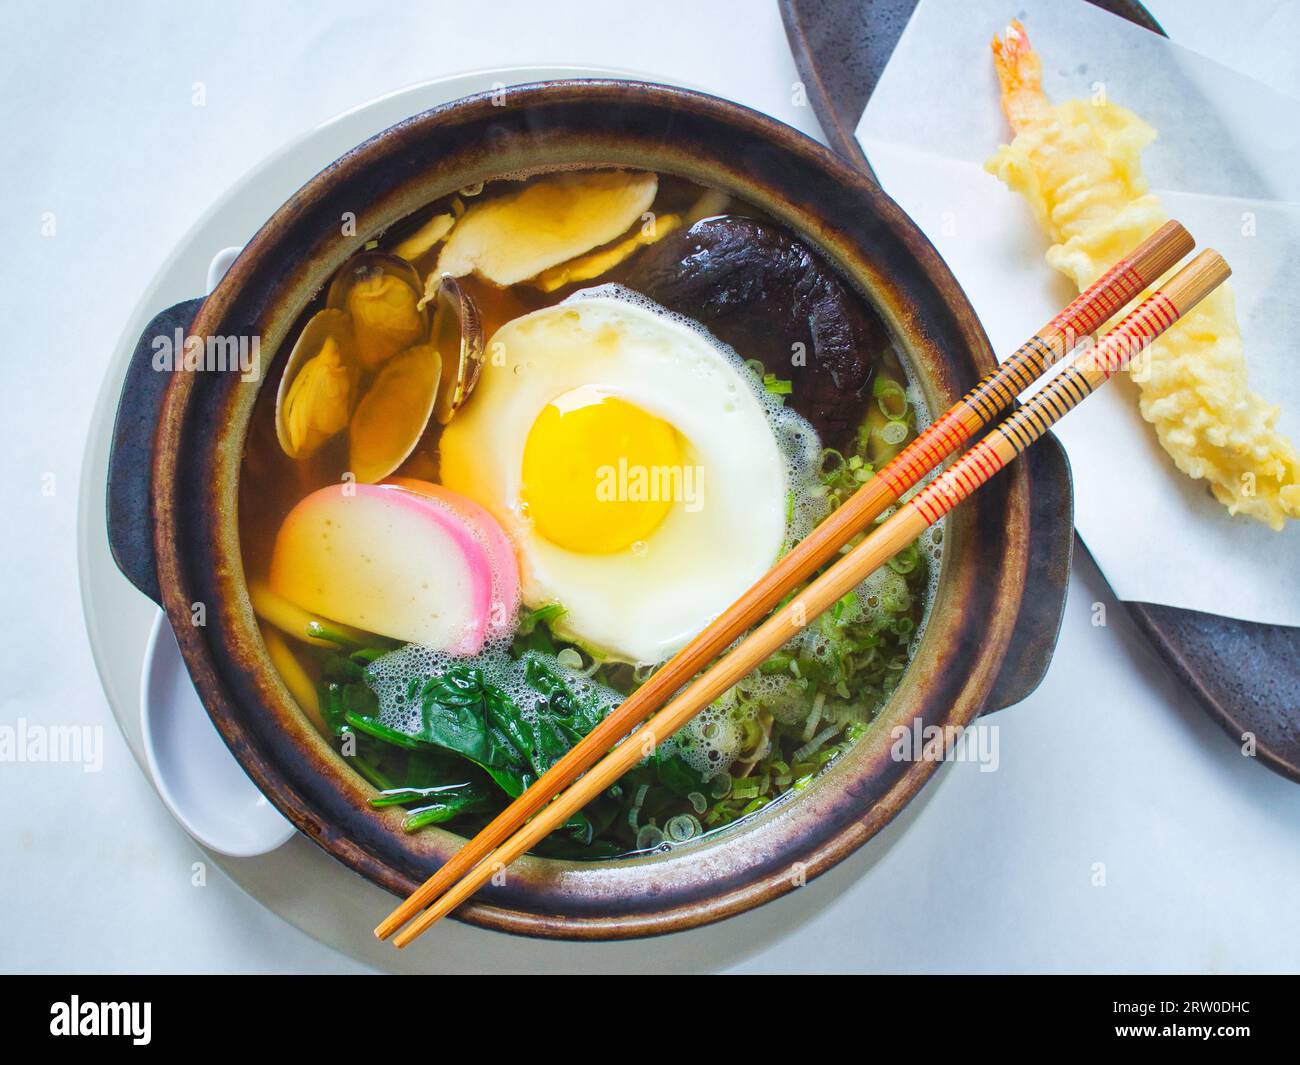 Top view of nabeyaki udon, Japanese soup with chopsticks. Stock Photo